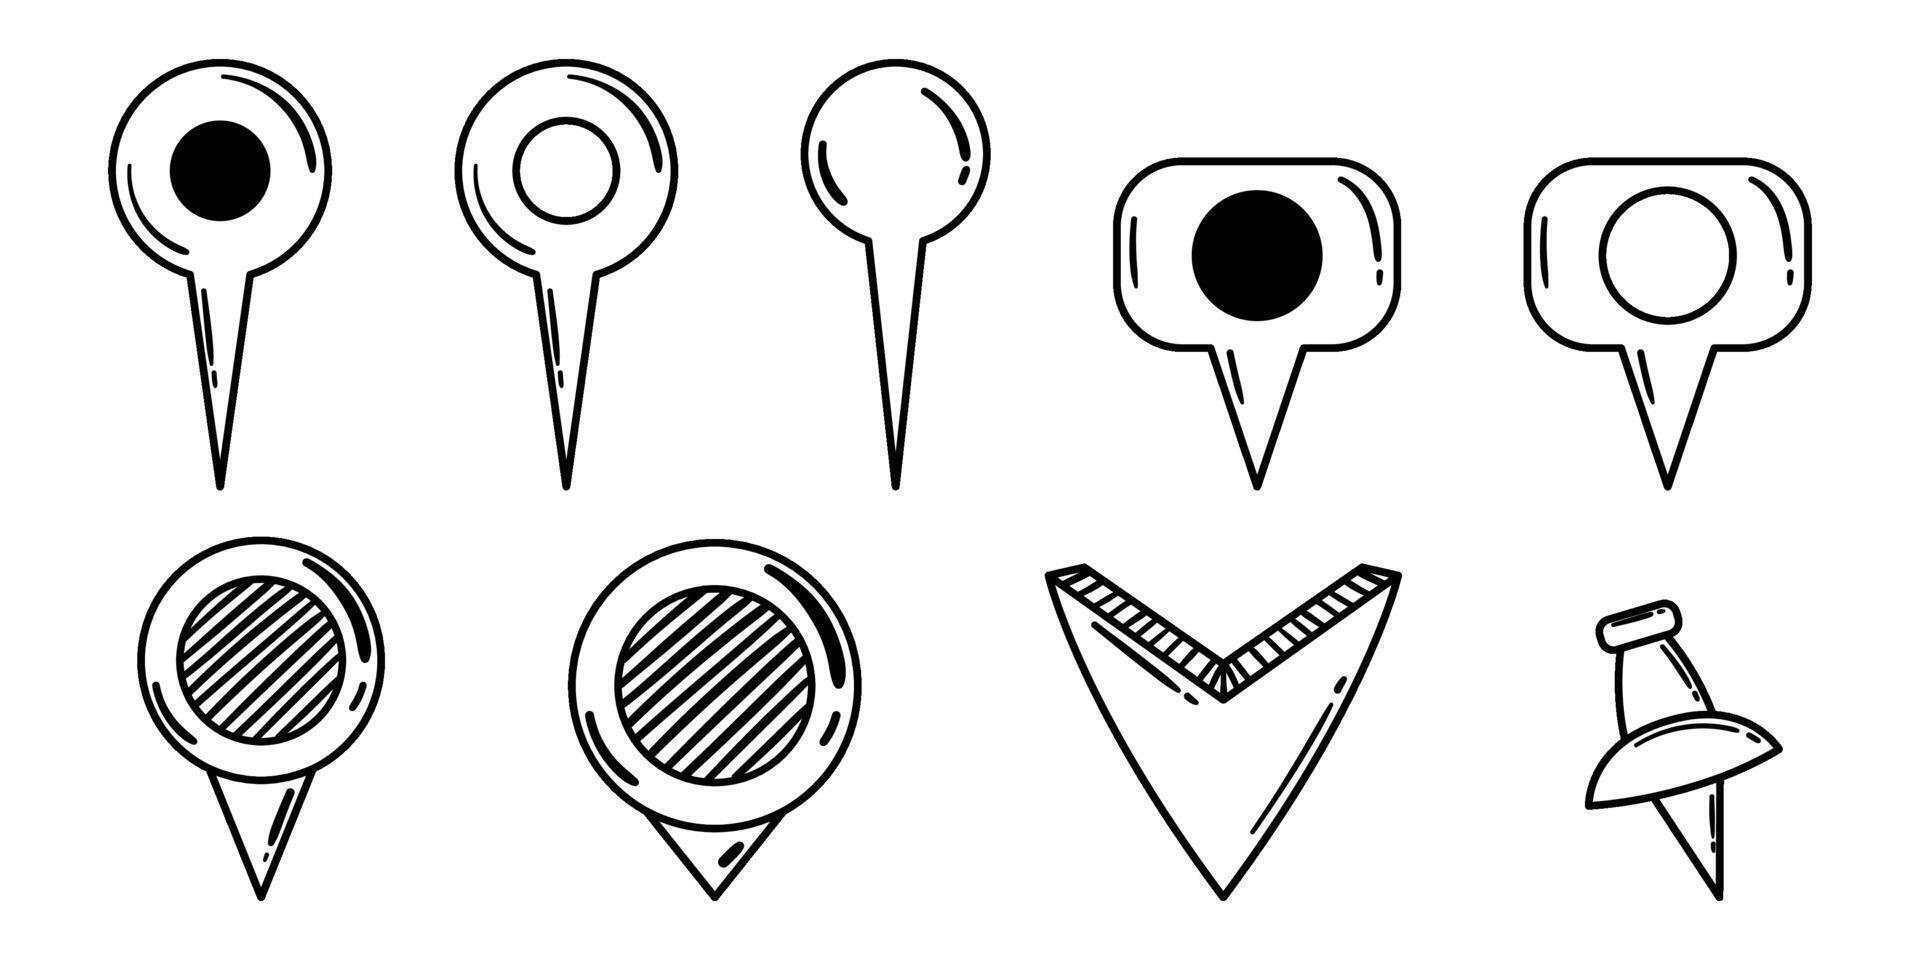 Set of Hand Drawn Doodle Location Pins. Diversify Your Designs with Various Navigation Markers, Pinpoints, Tags and Arrow for a Fun and Engaging Look. vector